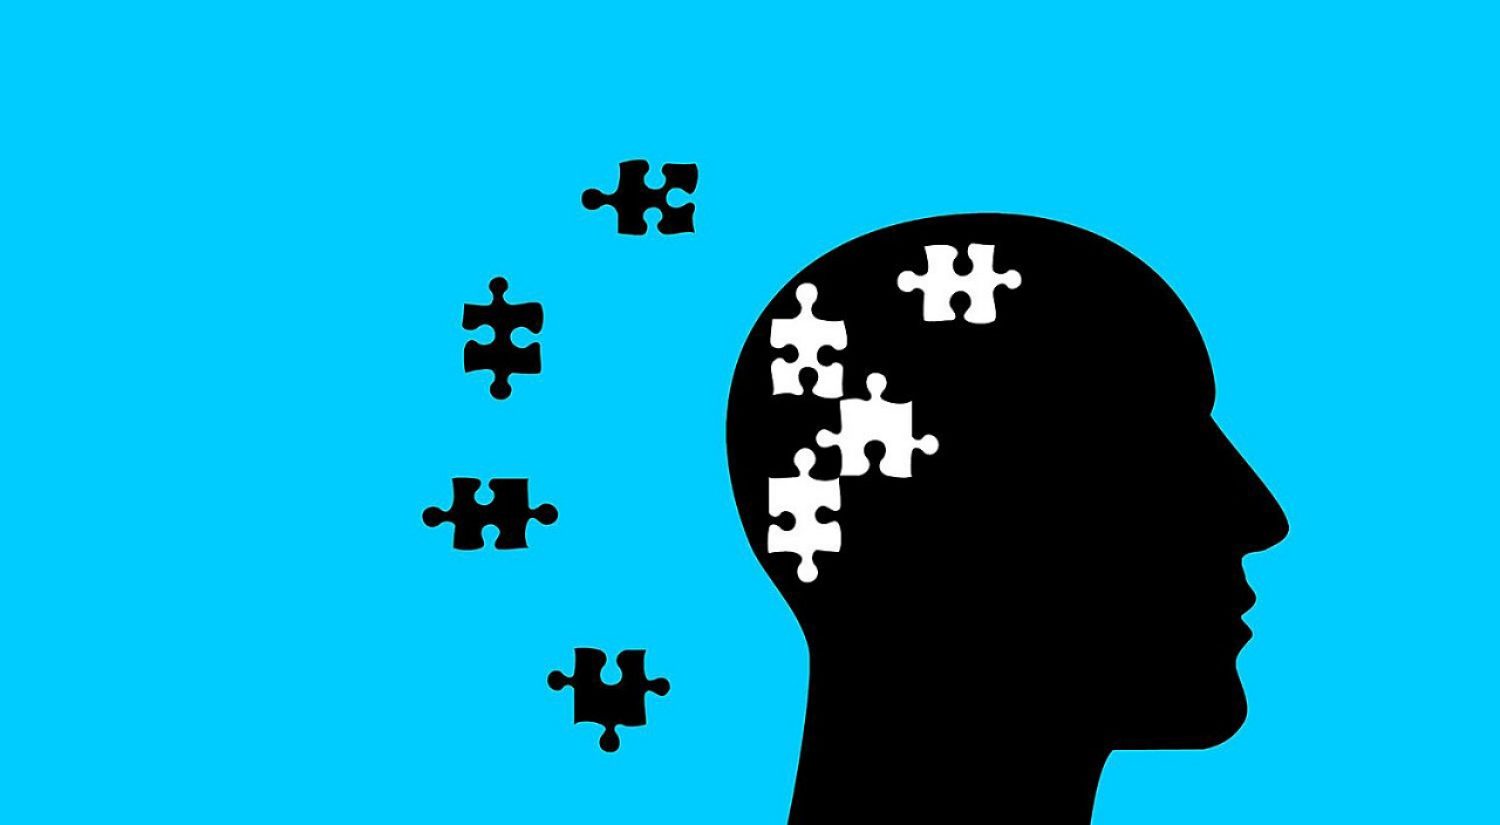 silhoutte of a human head with puzzle-shaped pieces removed